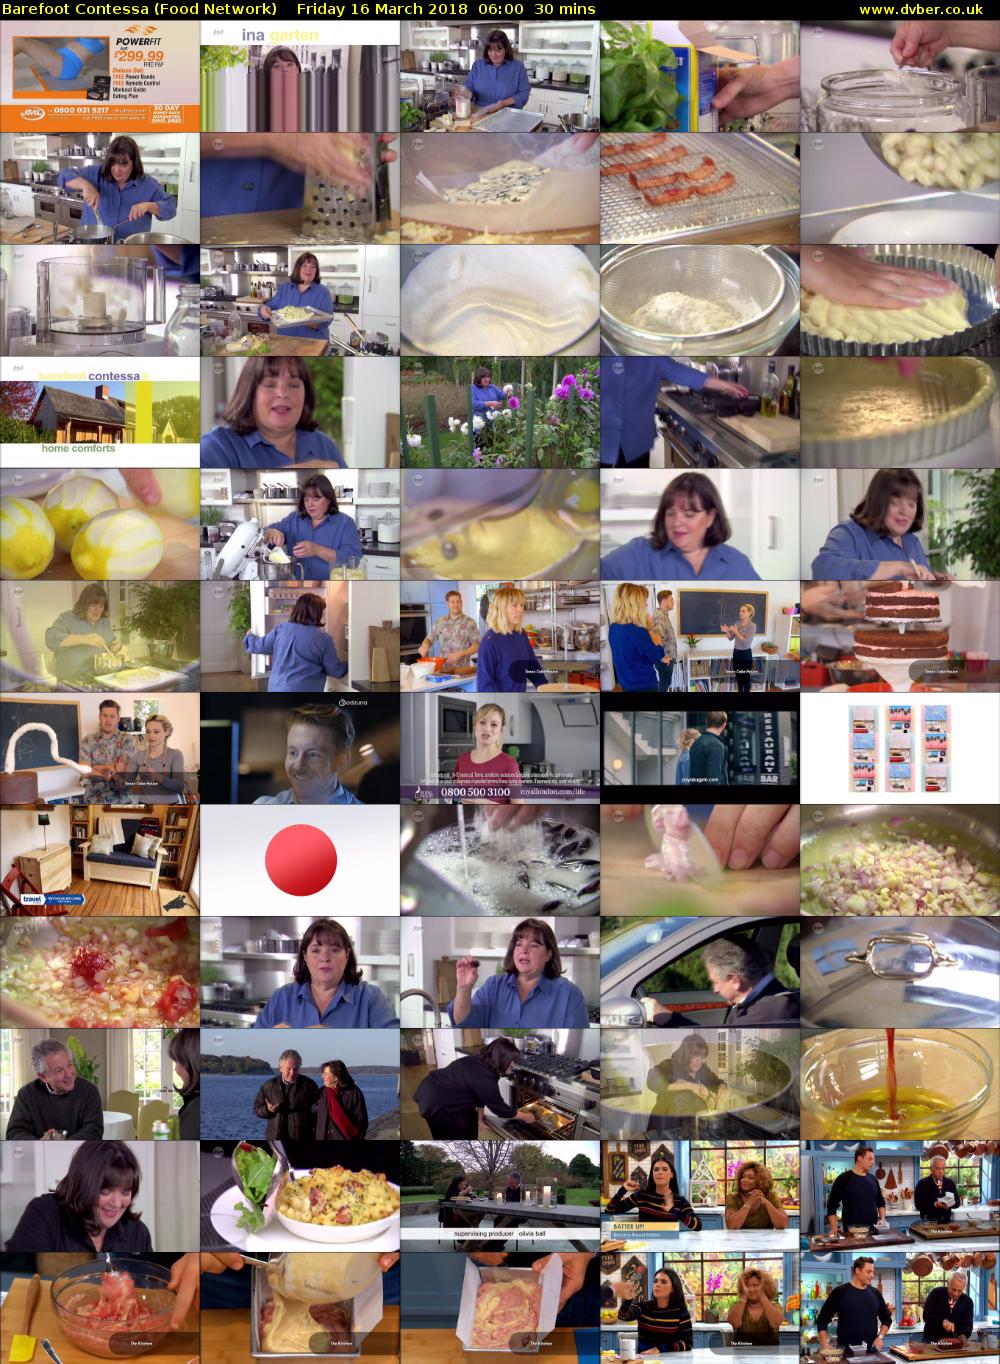 Barefoot Contessa (Food Network) Friday 16 March 2018 06:00 - 06:30